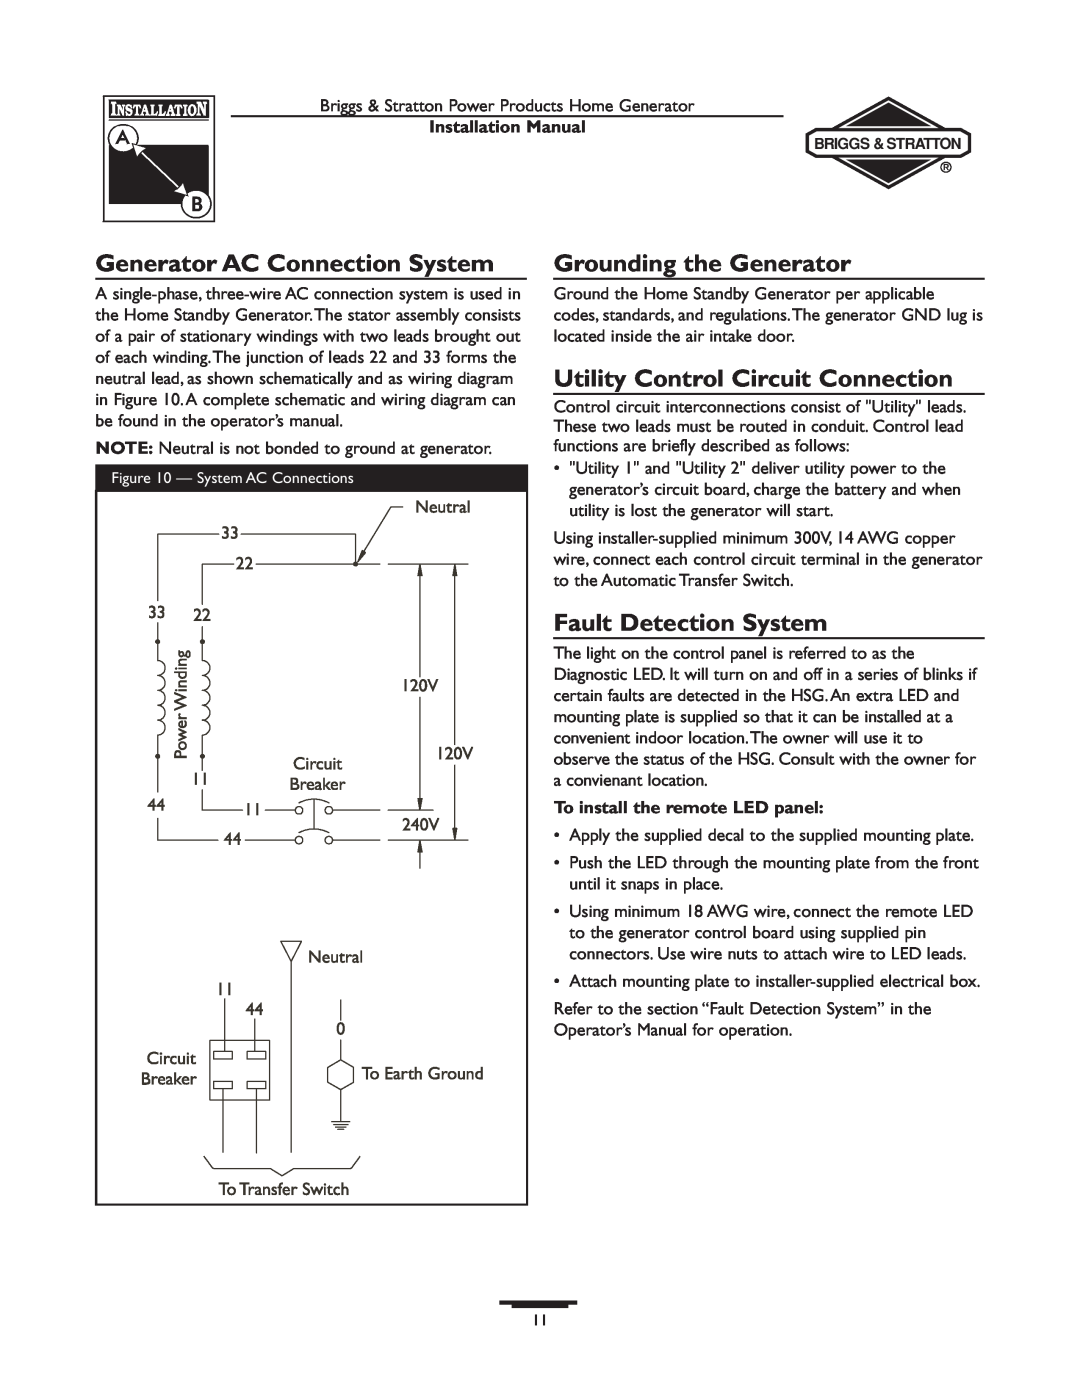 Briggs & Stratton 01815-0 Generator AC Connection System, Grounding the Generator, Utility Control Circuit Connection 